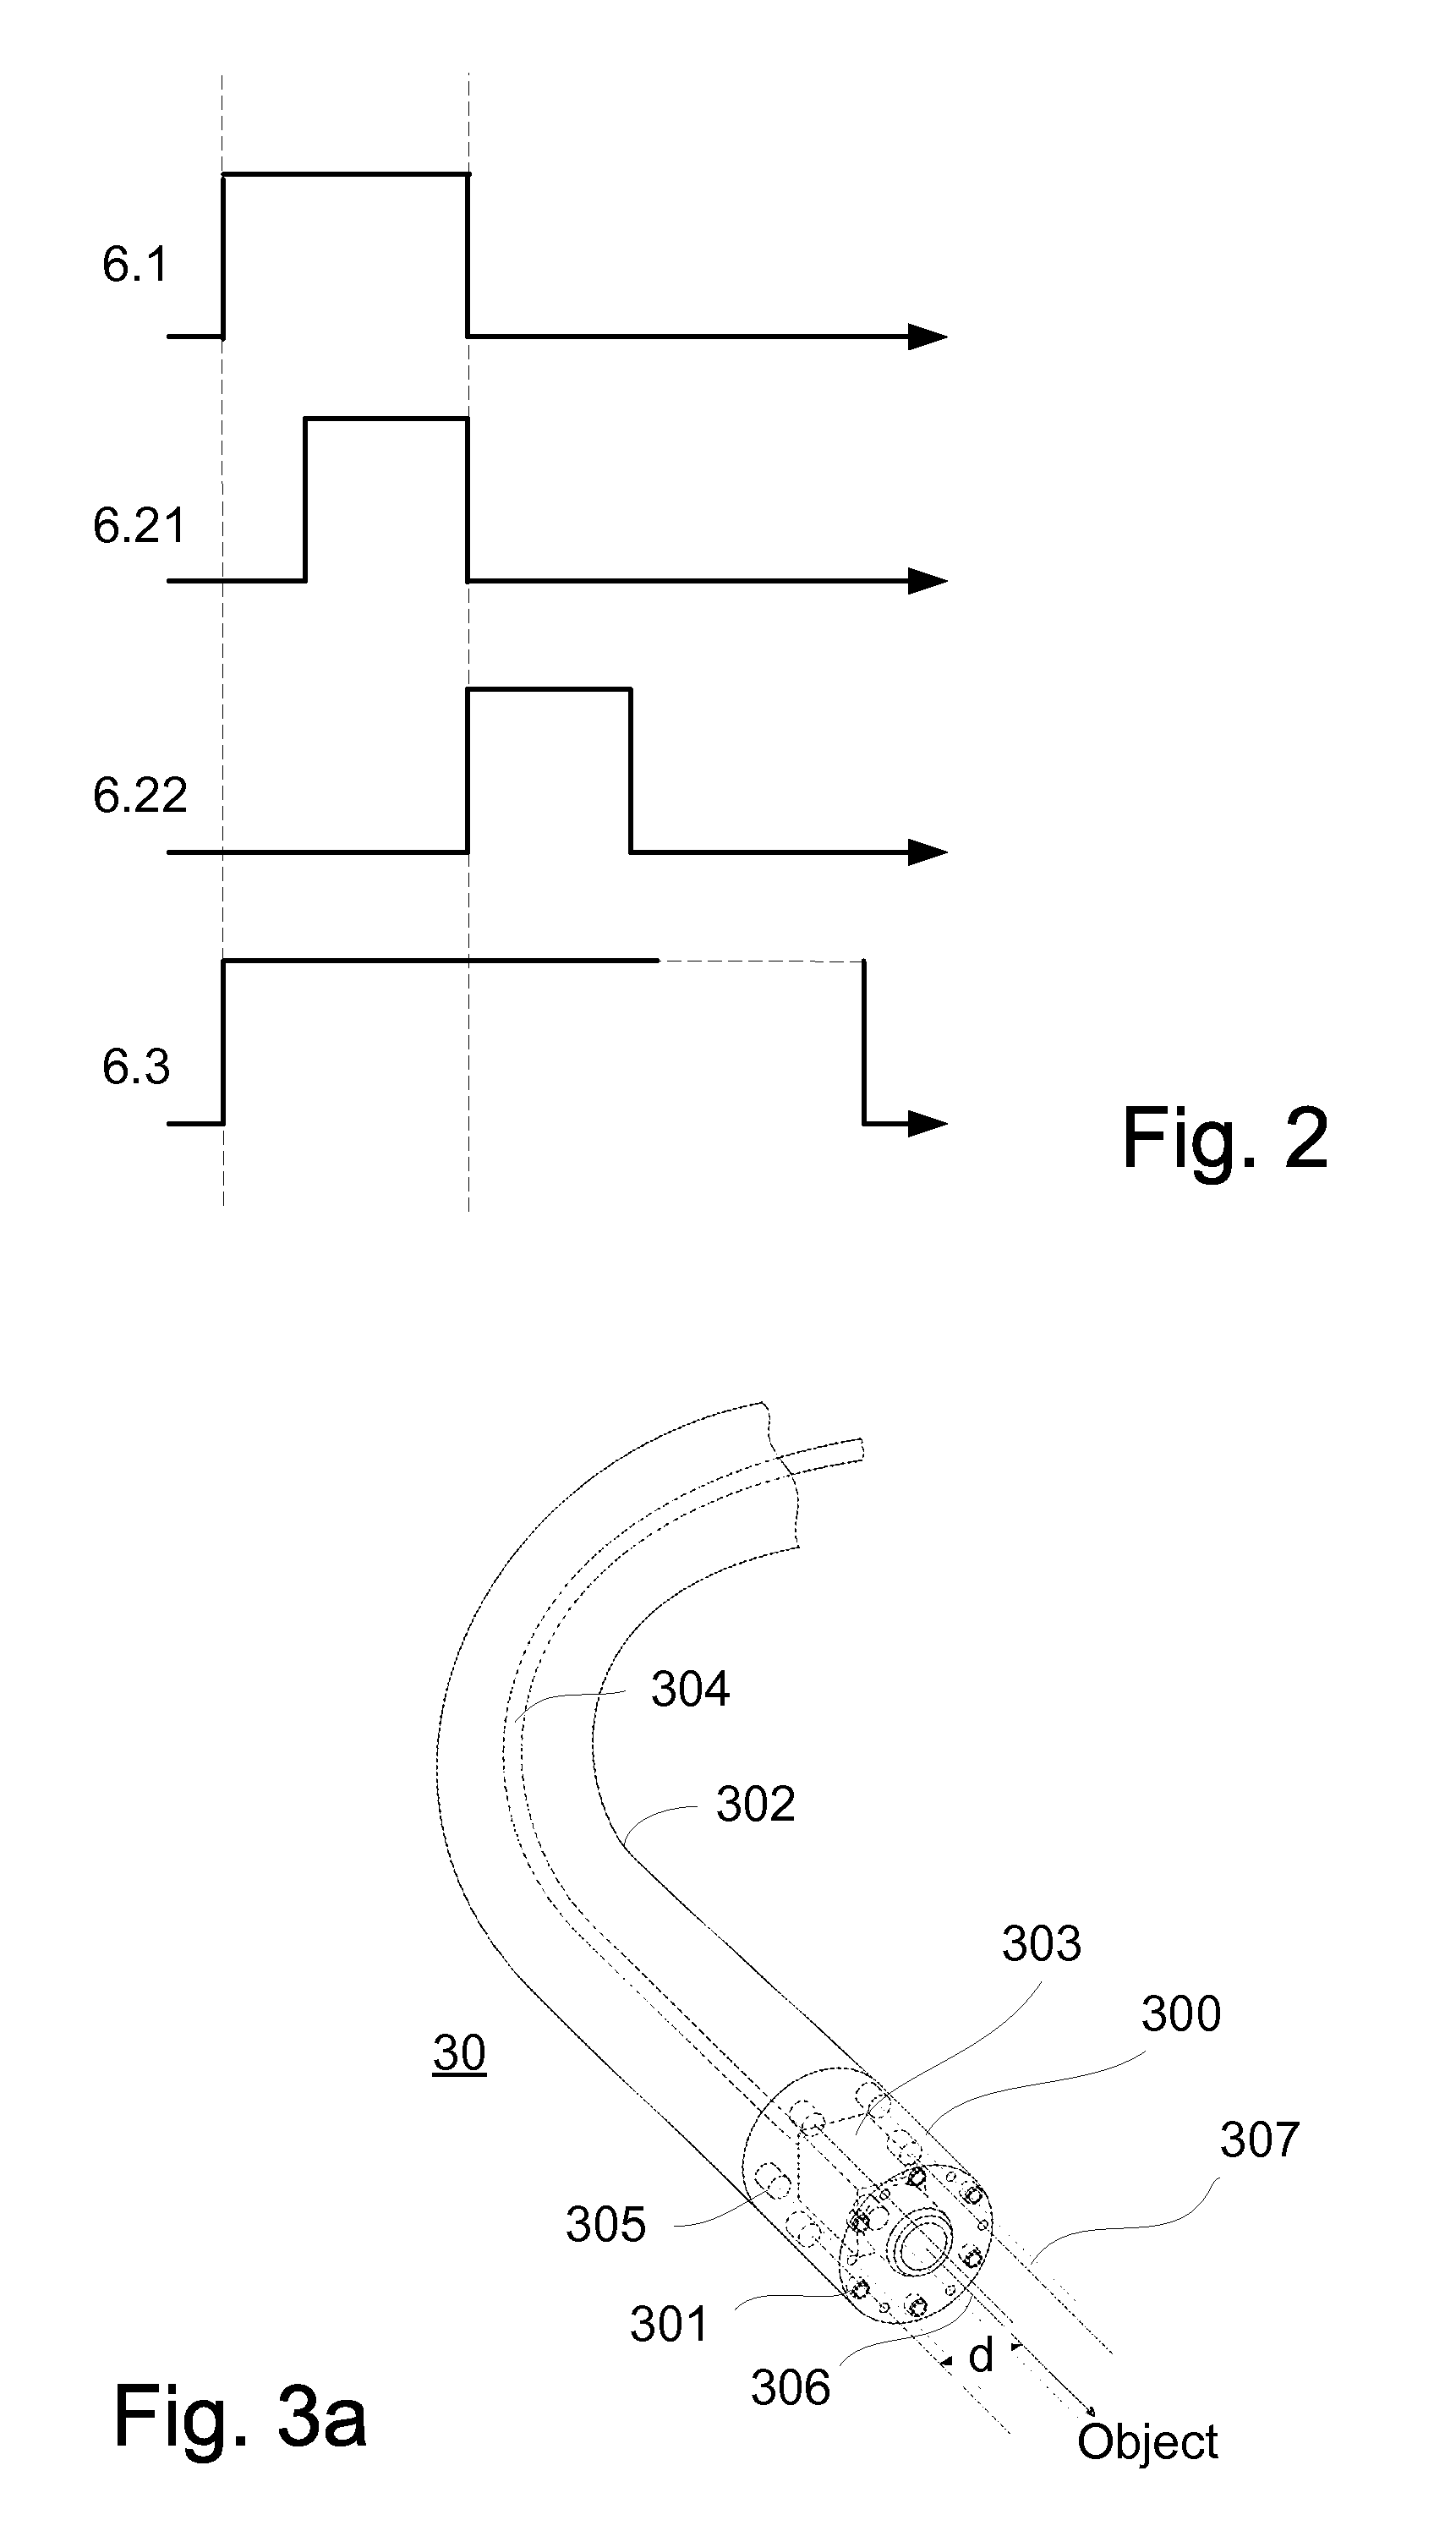 Image processing system having an additional piece of scale information to be processed together with the image information